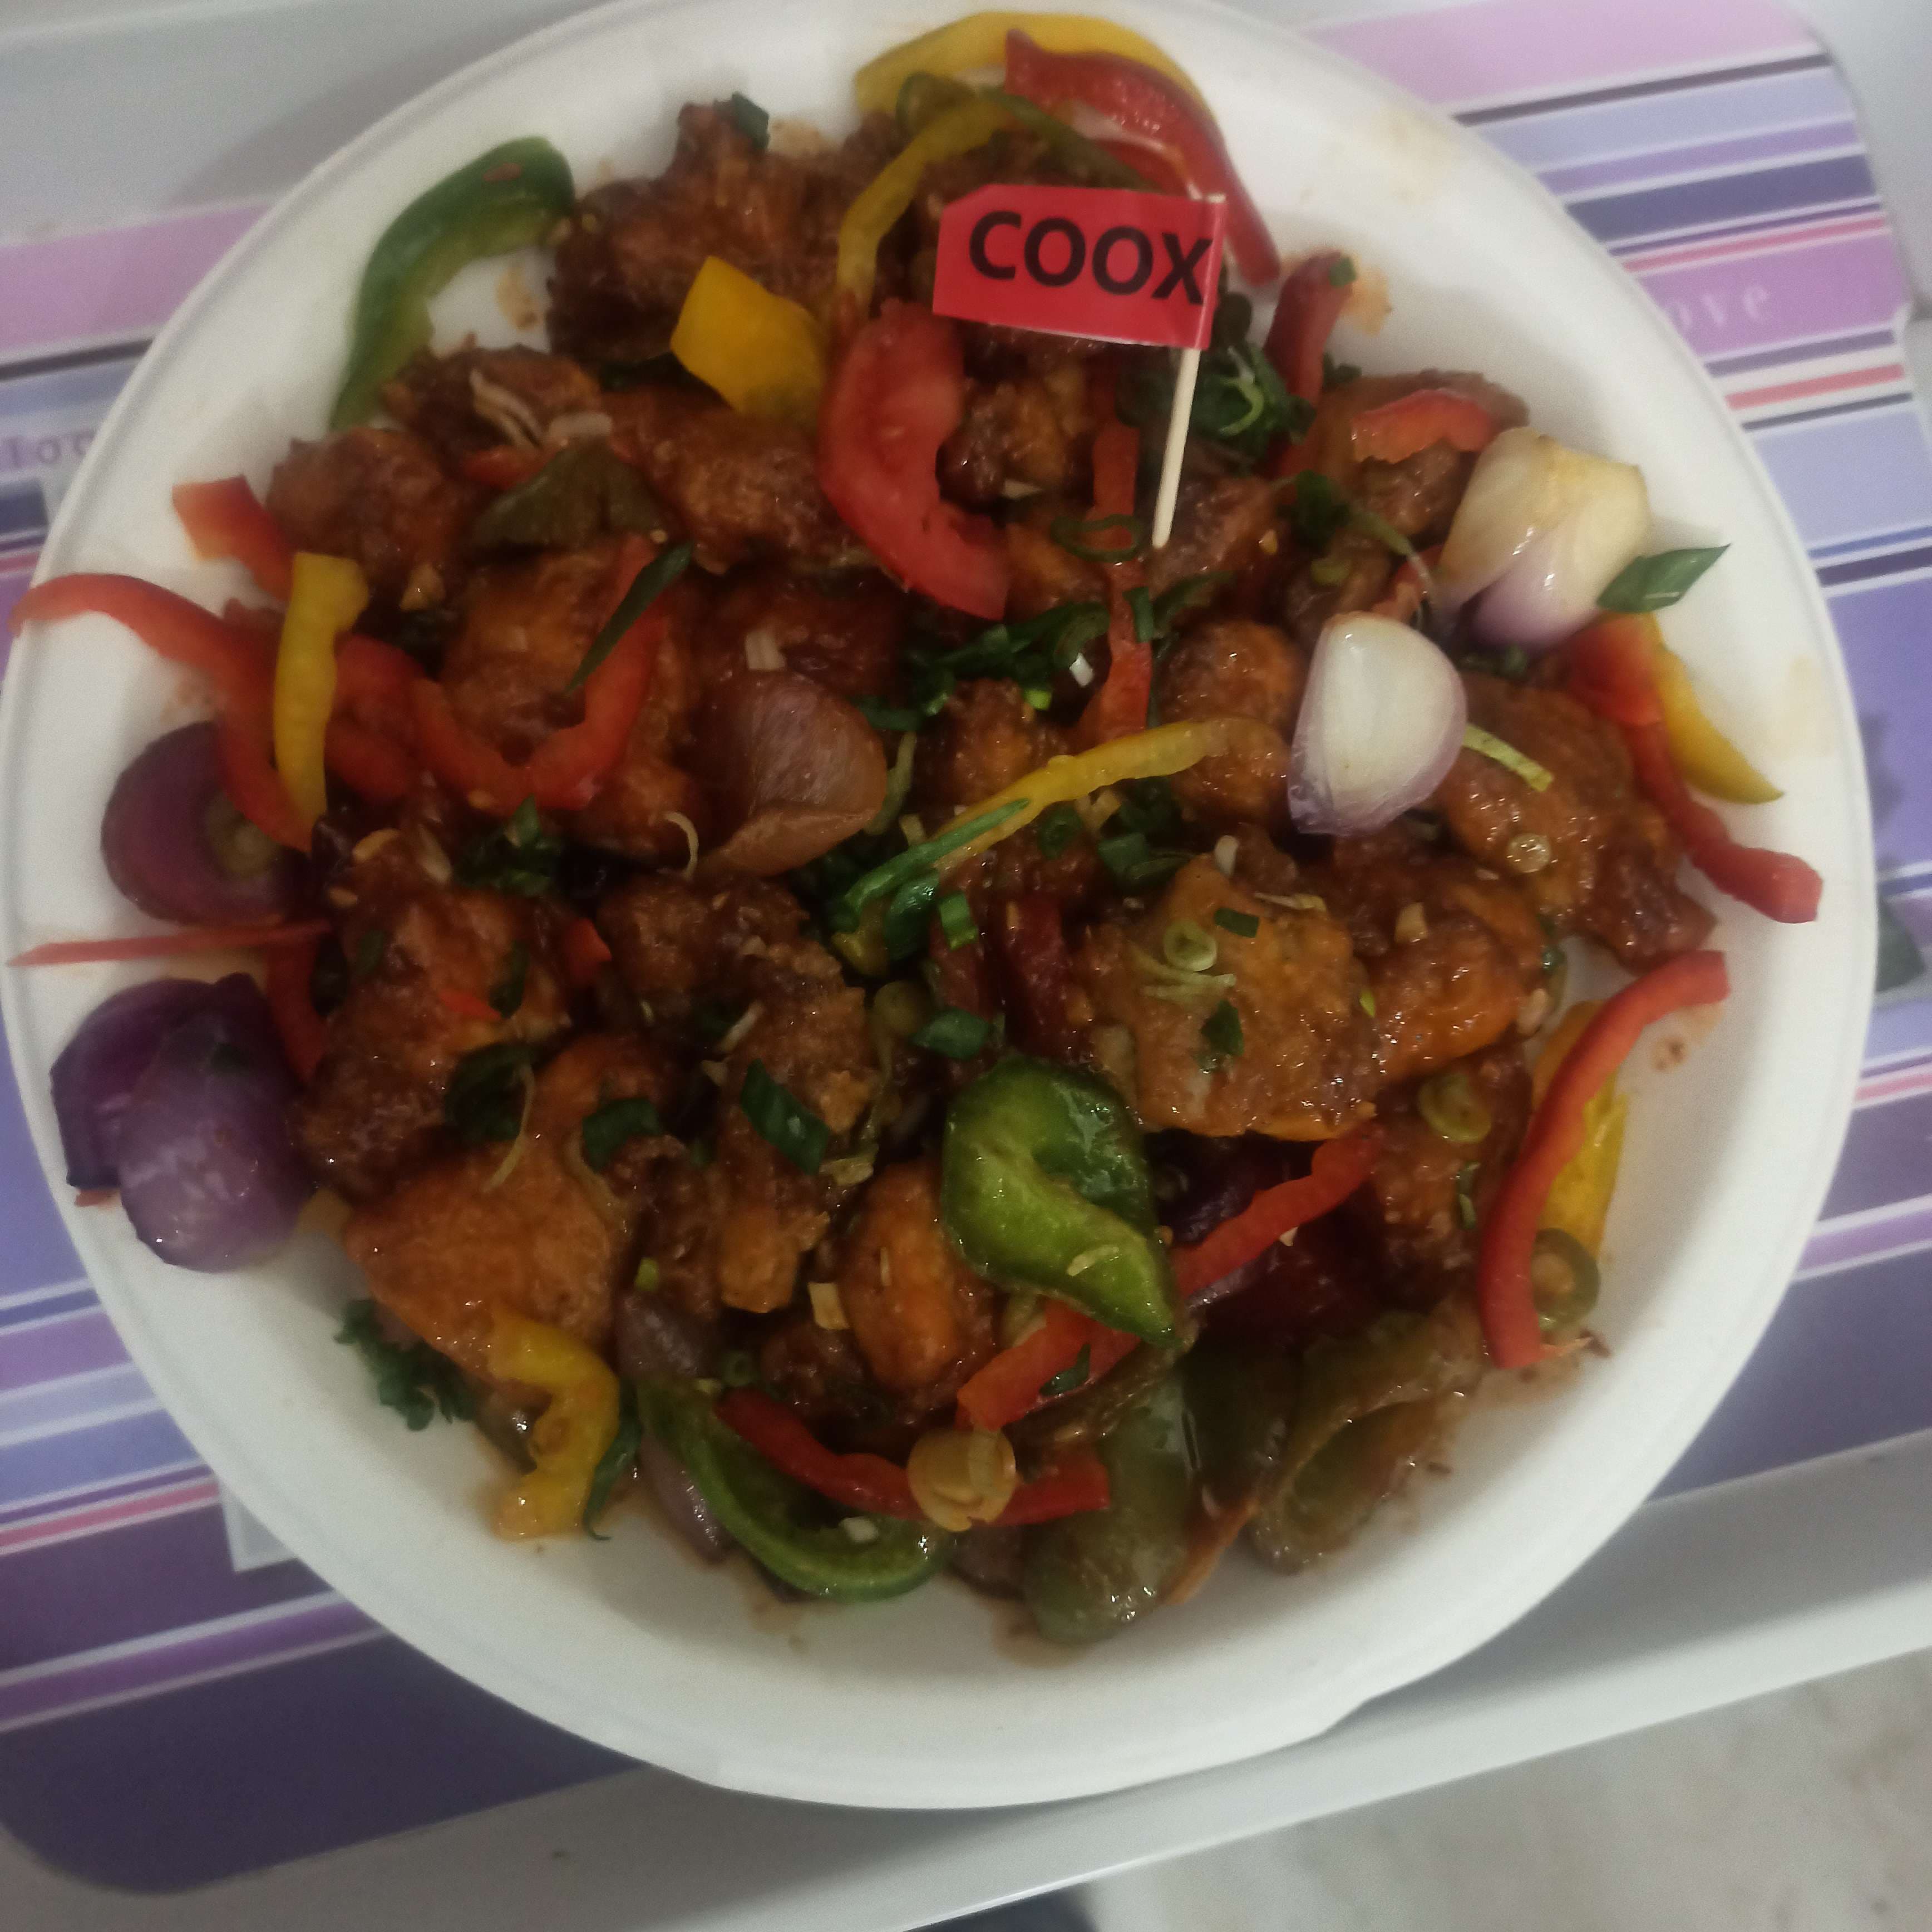 Tasty dish cooked by COOX chefs cooks during occasions parties events at home